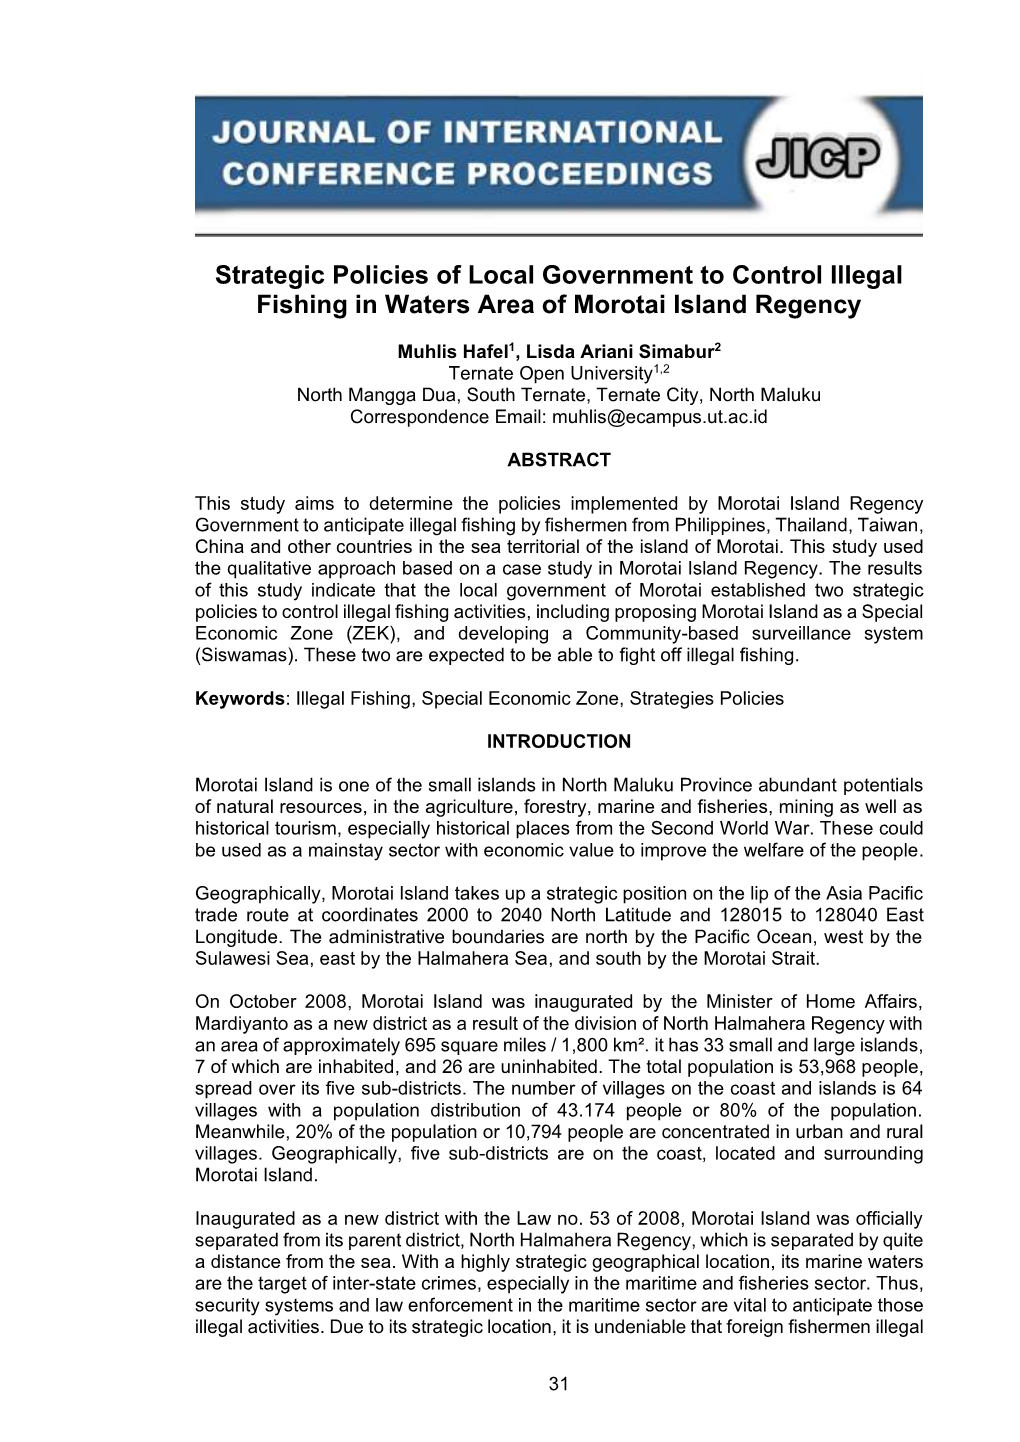 Strategic Policies of Local Government to Control Illegal Fishing in Waters Area of Morotai Island Regency